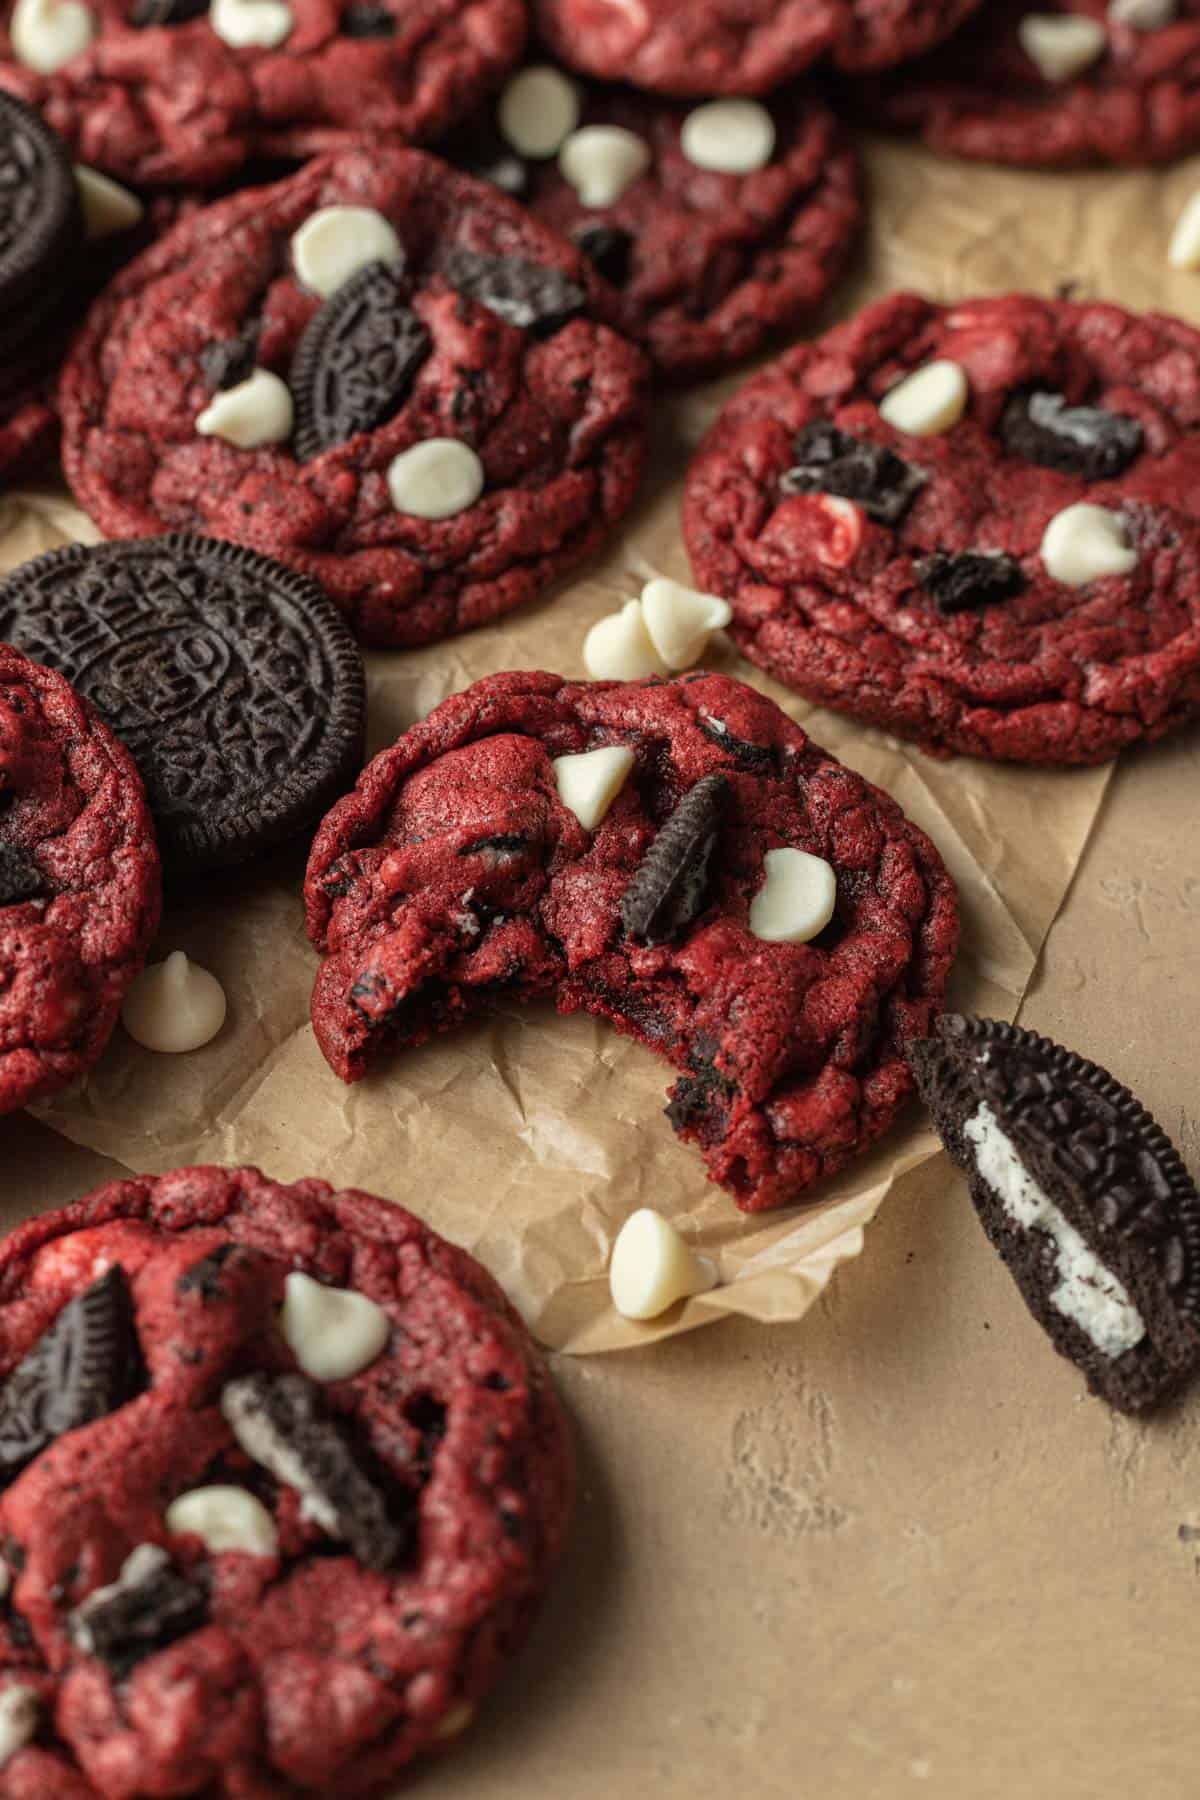 Ready to eat Red Velvet Oreo Cookies sitting on a sheet of parchment paper showing one cookie that recently had a bite taken out of it!